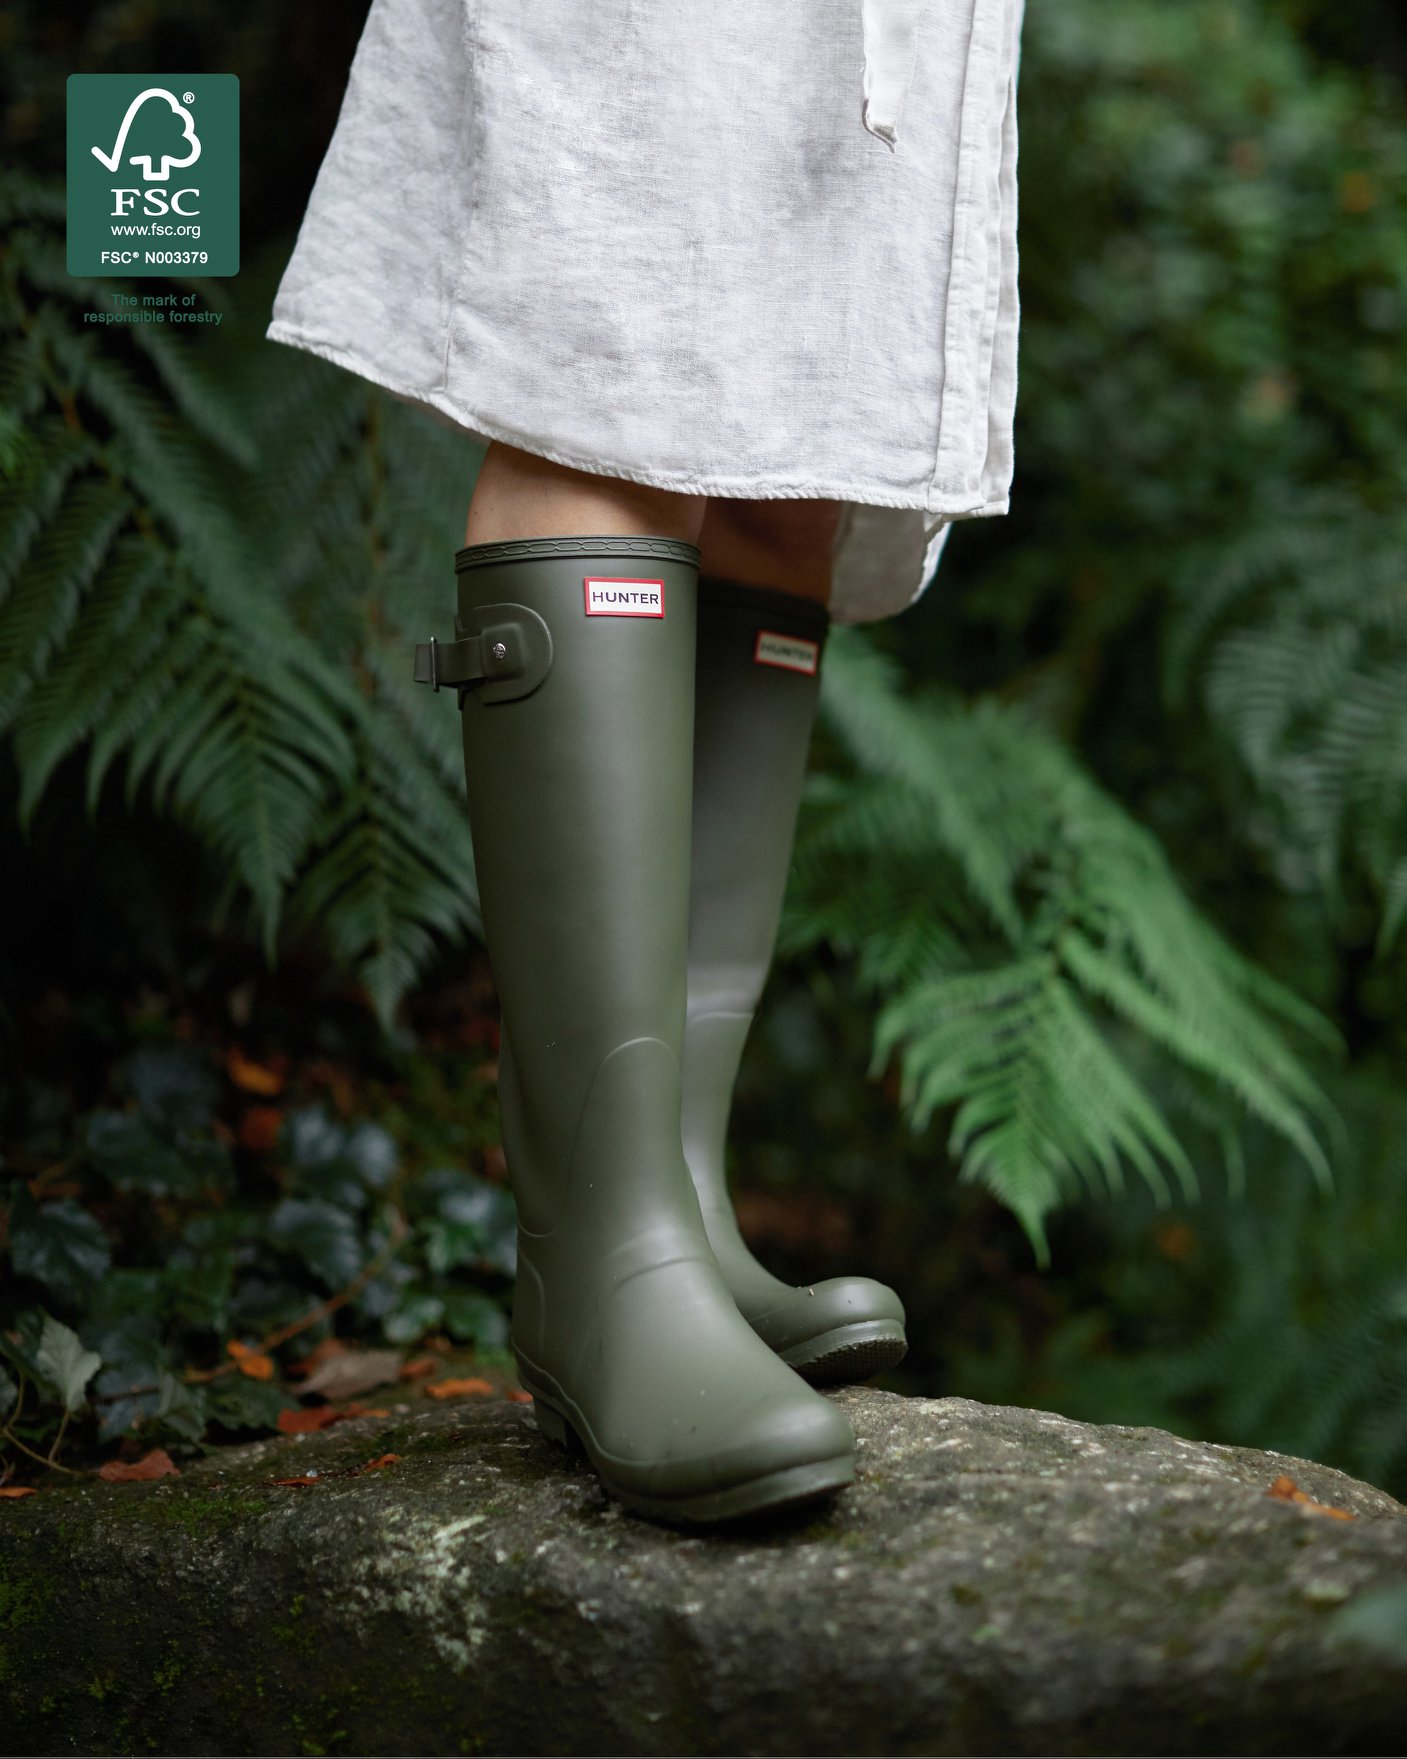 Hunter Boots: Protecting forests and protecting our future